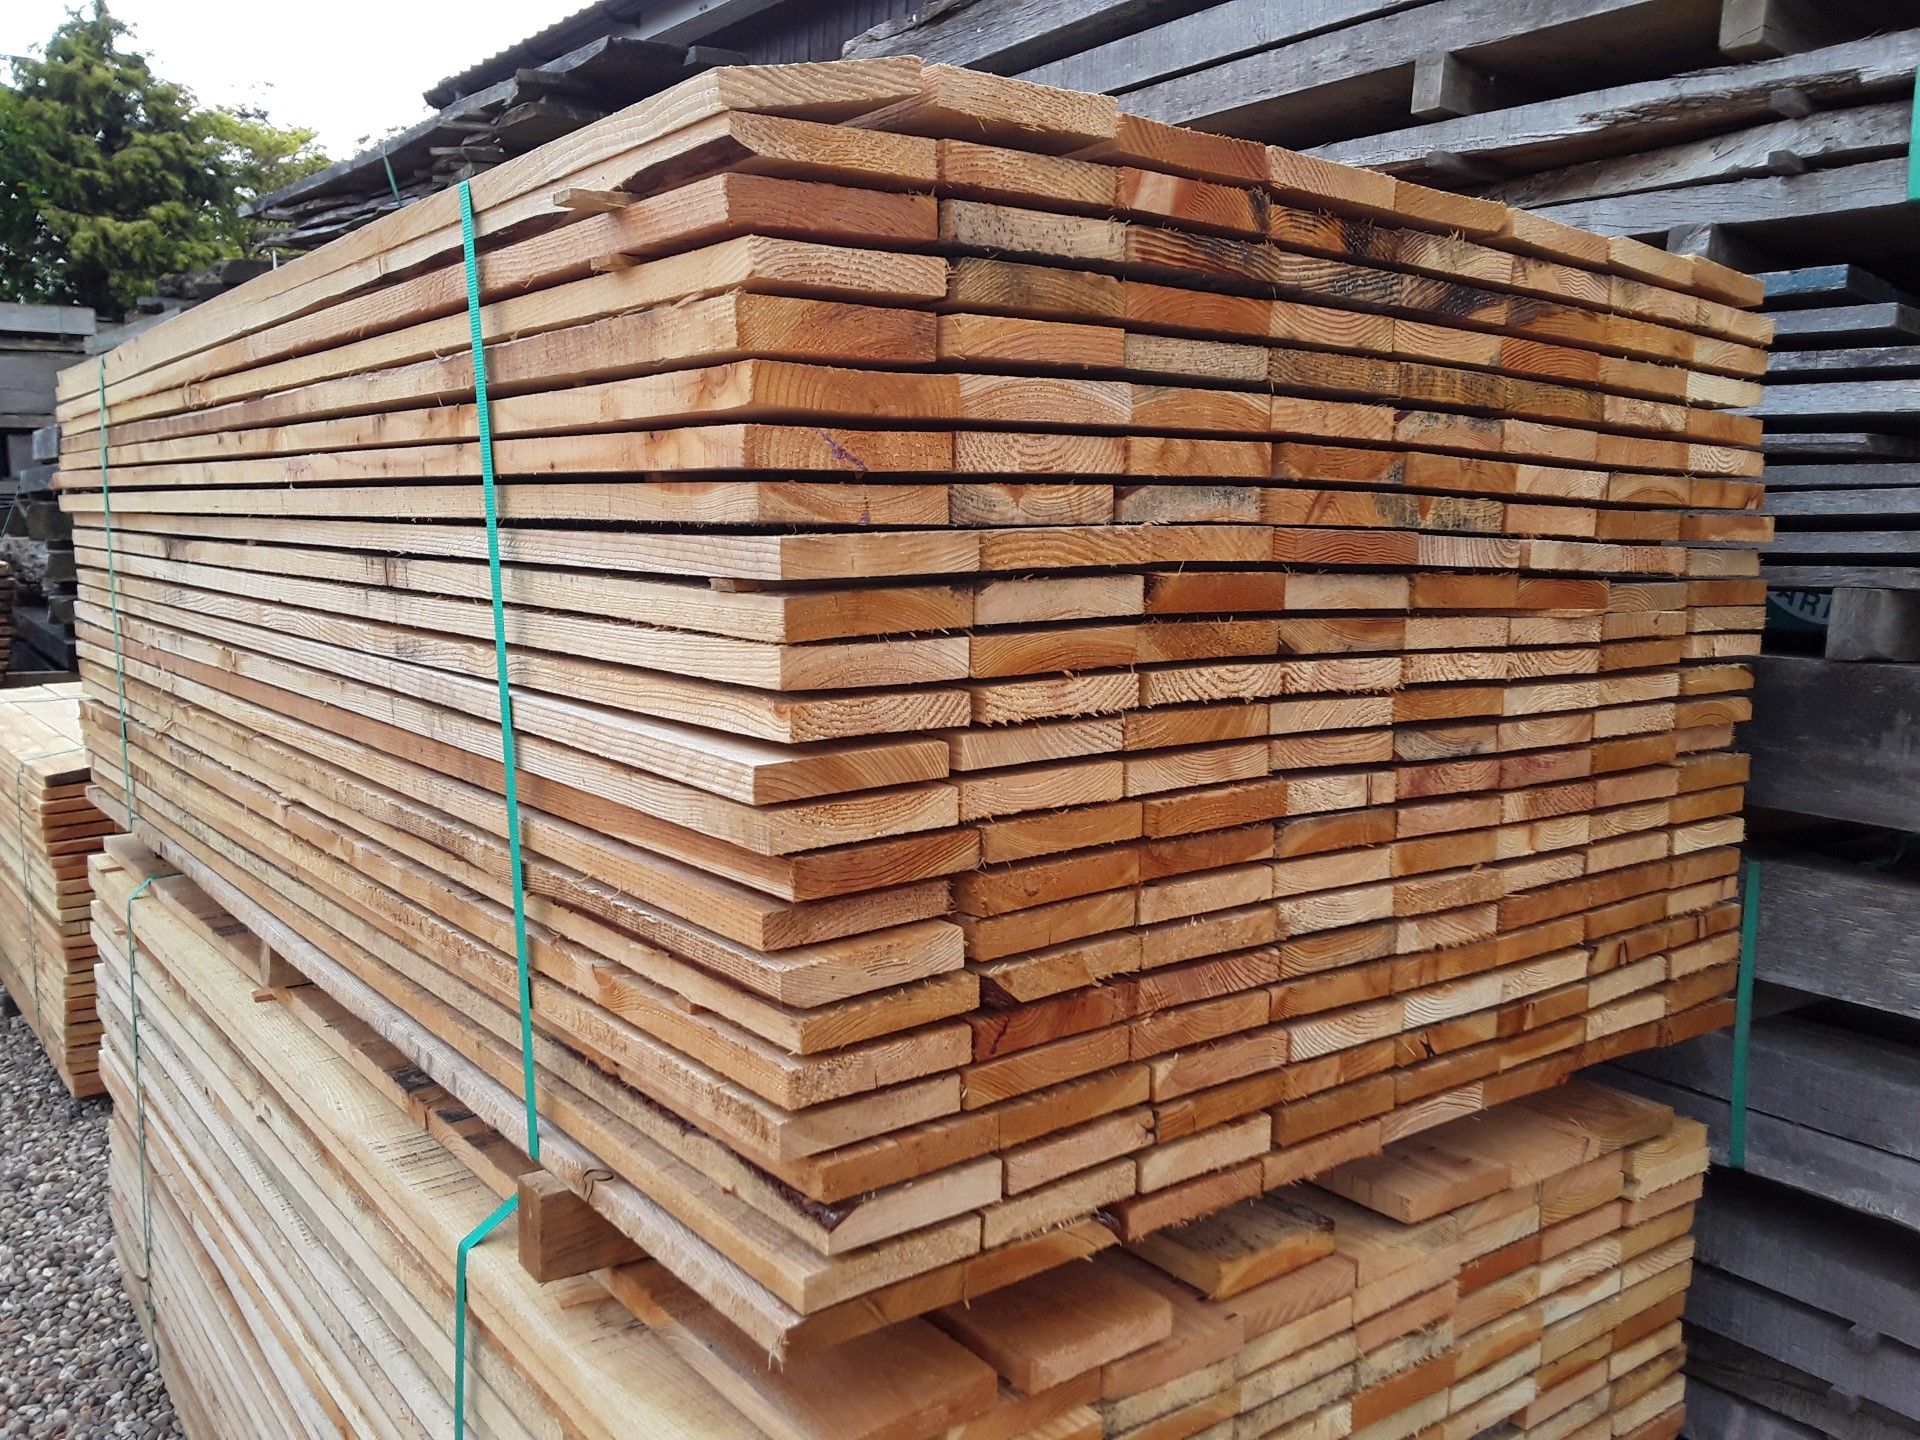 50x Softwood Sawn Timber Mixed Larch / Douglas Fir Boards - Image 4 of 6